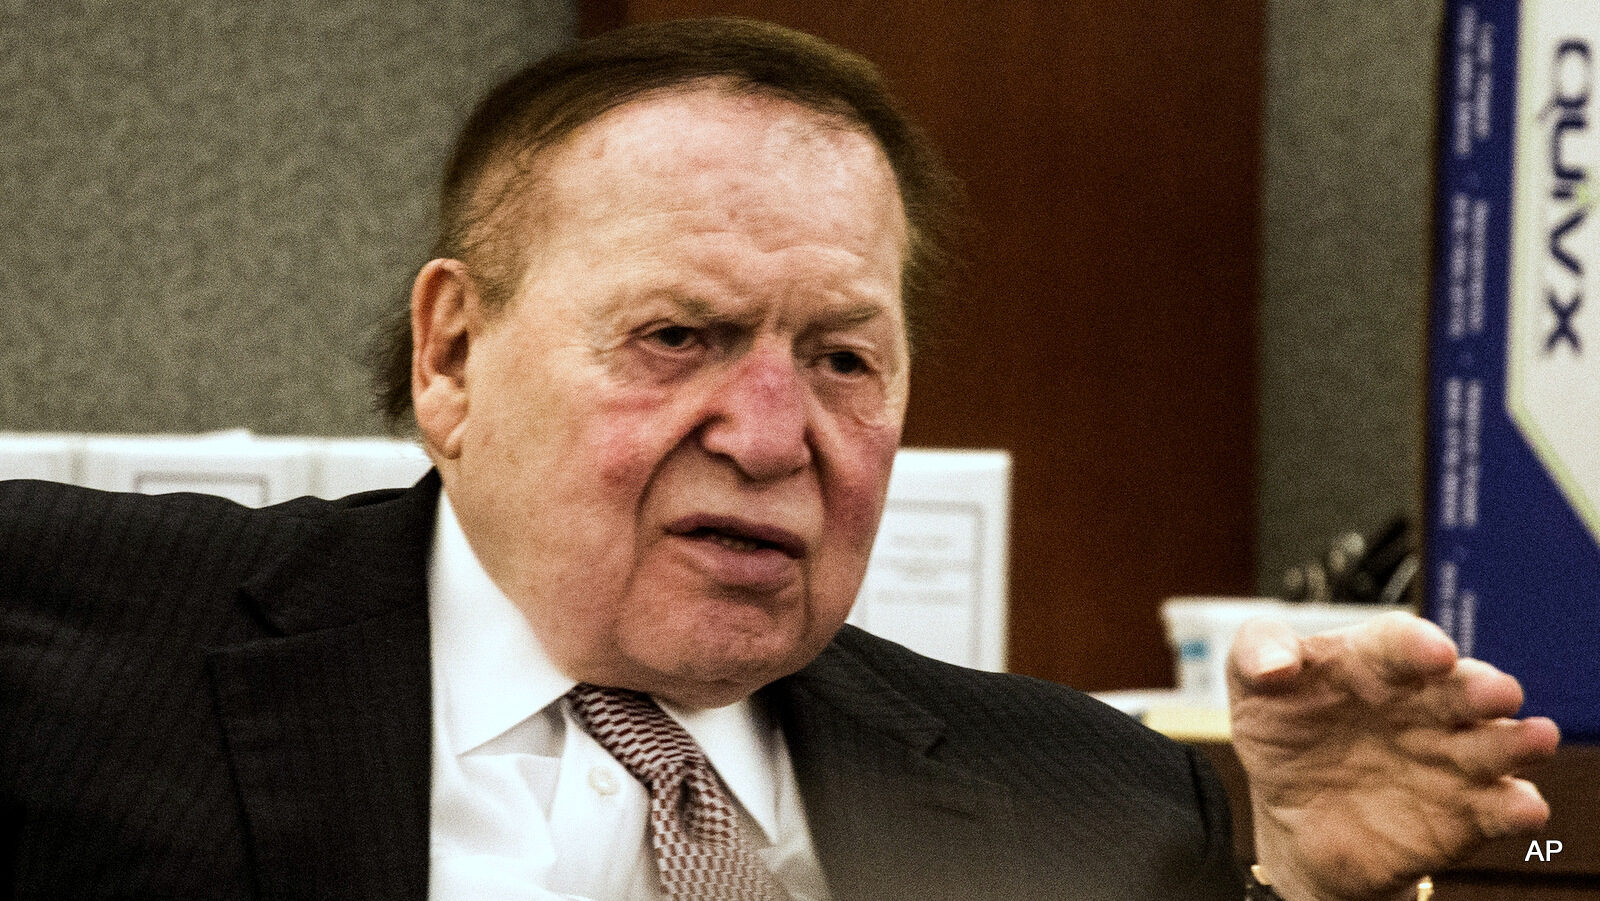 Las Vegas Sands Corp. Chairman and CEO Sheldon Adelson testifies at Clark County Justice Center on Tuesday, April 28, 2015, in Las Vegas.